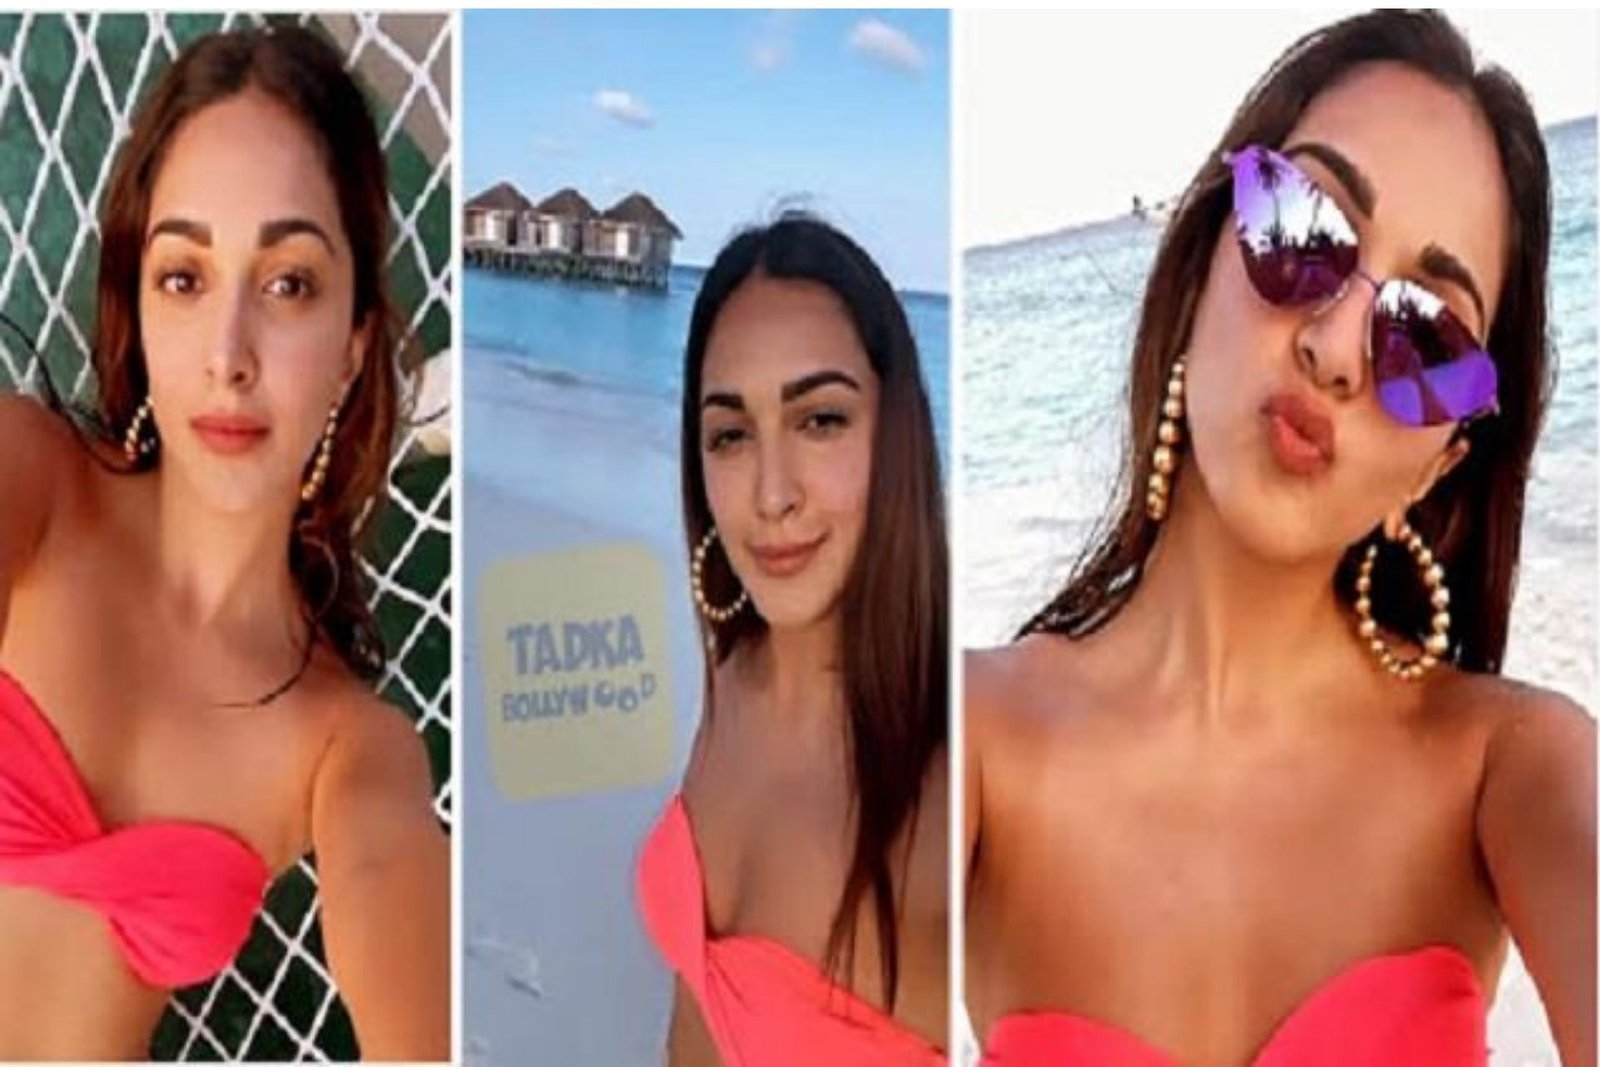 Kiara Advani jetted off to the Maldives to ring in the New Year 2021. She also flaunted her beach-body and shared several photos of herself as she welcomed 2021. Kiara Advani recently completed filming for Raj Mehta's Jug Jugg Jeeyo. Varun Dhawan, Anil Kapoor, Neetu Kapoor, and Prajakta Kohli also appear in the film. She will also appear alongside Sidharth Malhotra in the Vikram Batra biopic Shershaah.